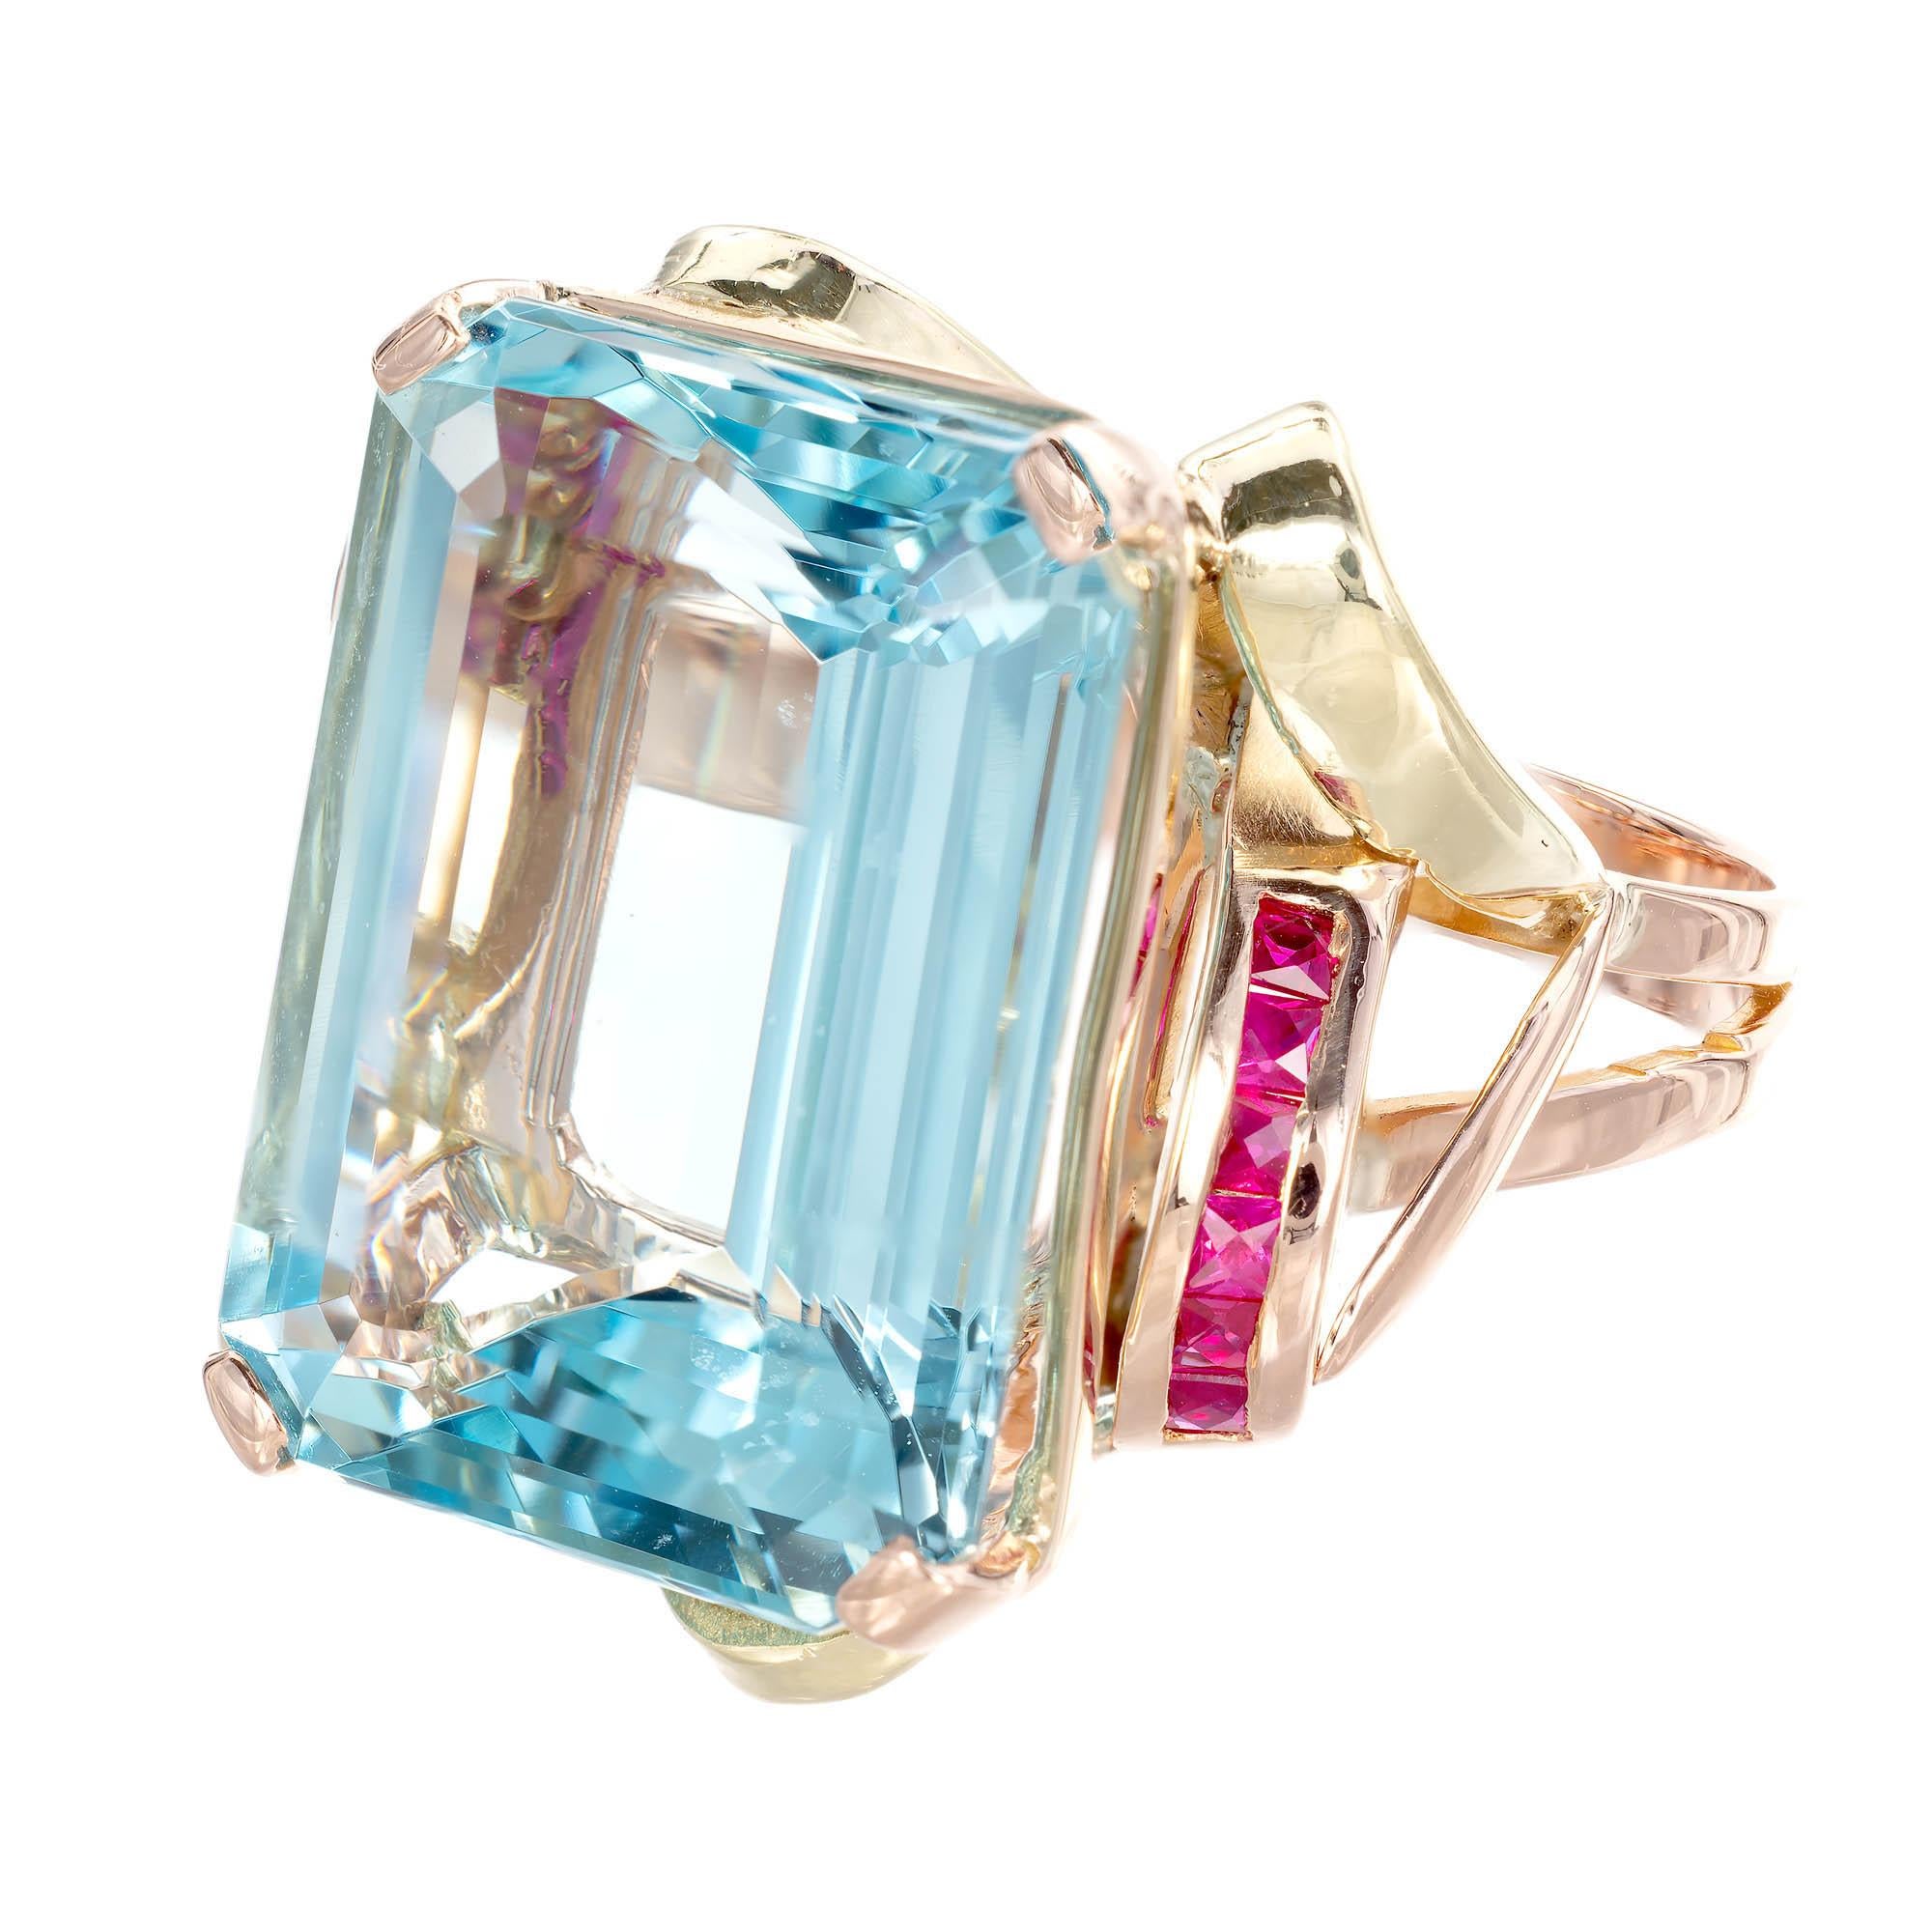 Vintage Aquamarine & Ruby ring. Octagonal deep blue Aquamarine set in a primarily rose color 14k gold ring with French cut Rubies channel set at opposite corners with yellow gold music note shapes opposite corners & front and back of ring.

1